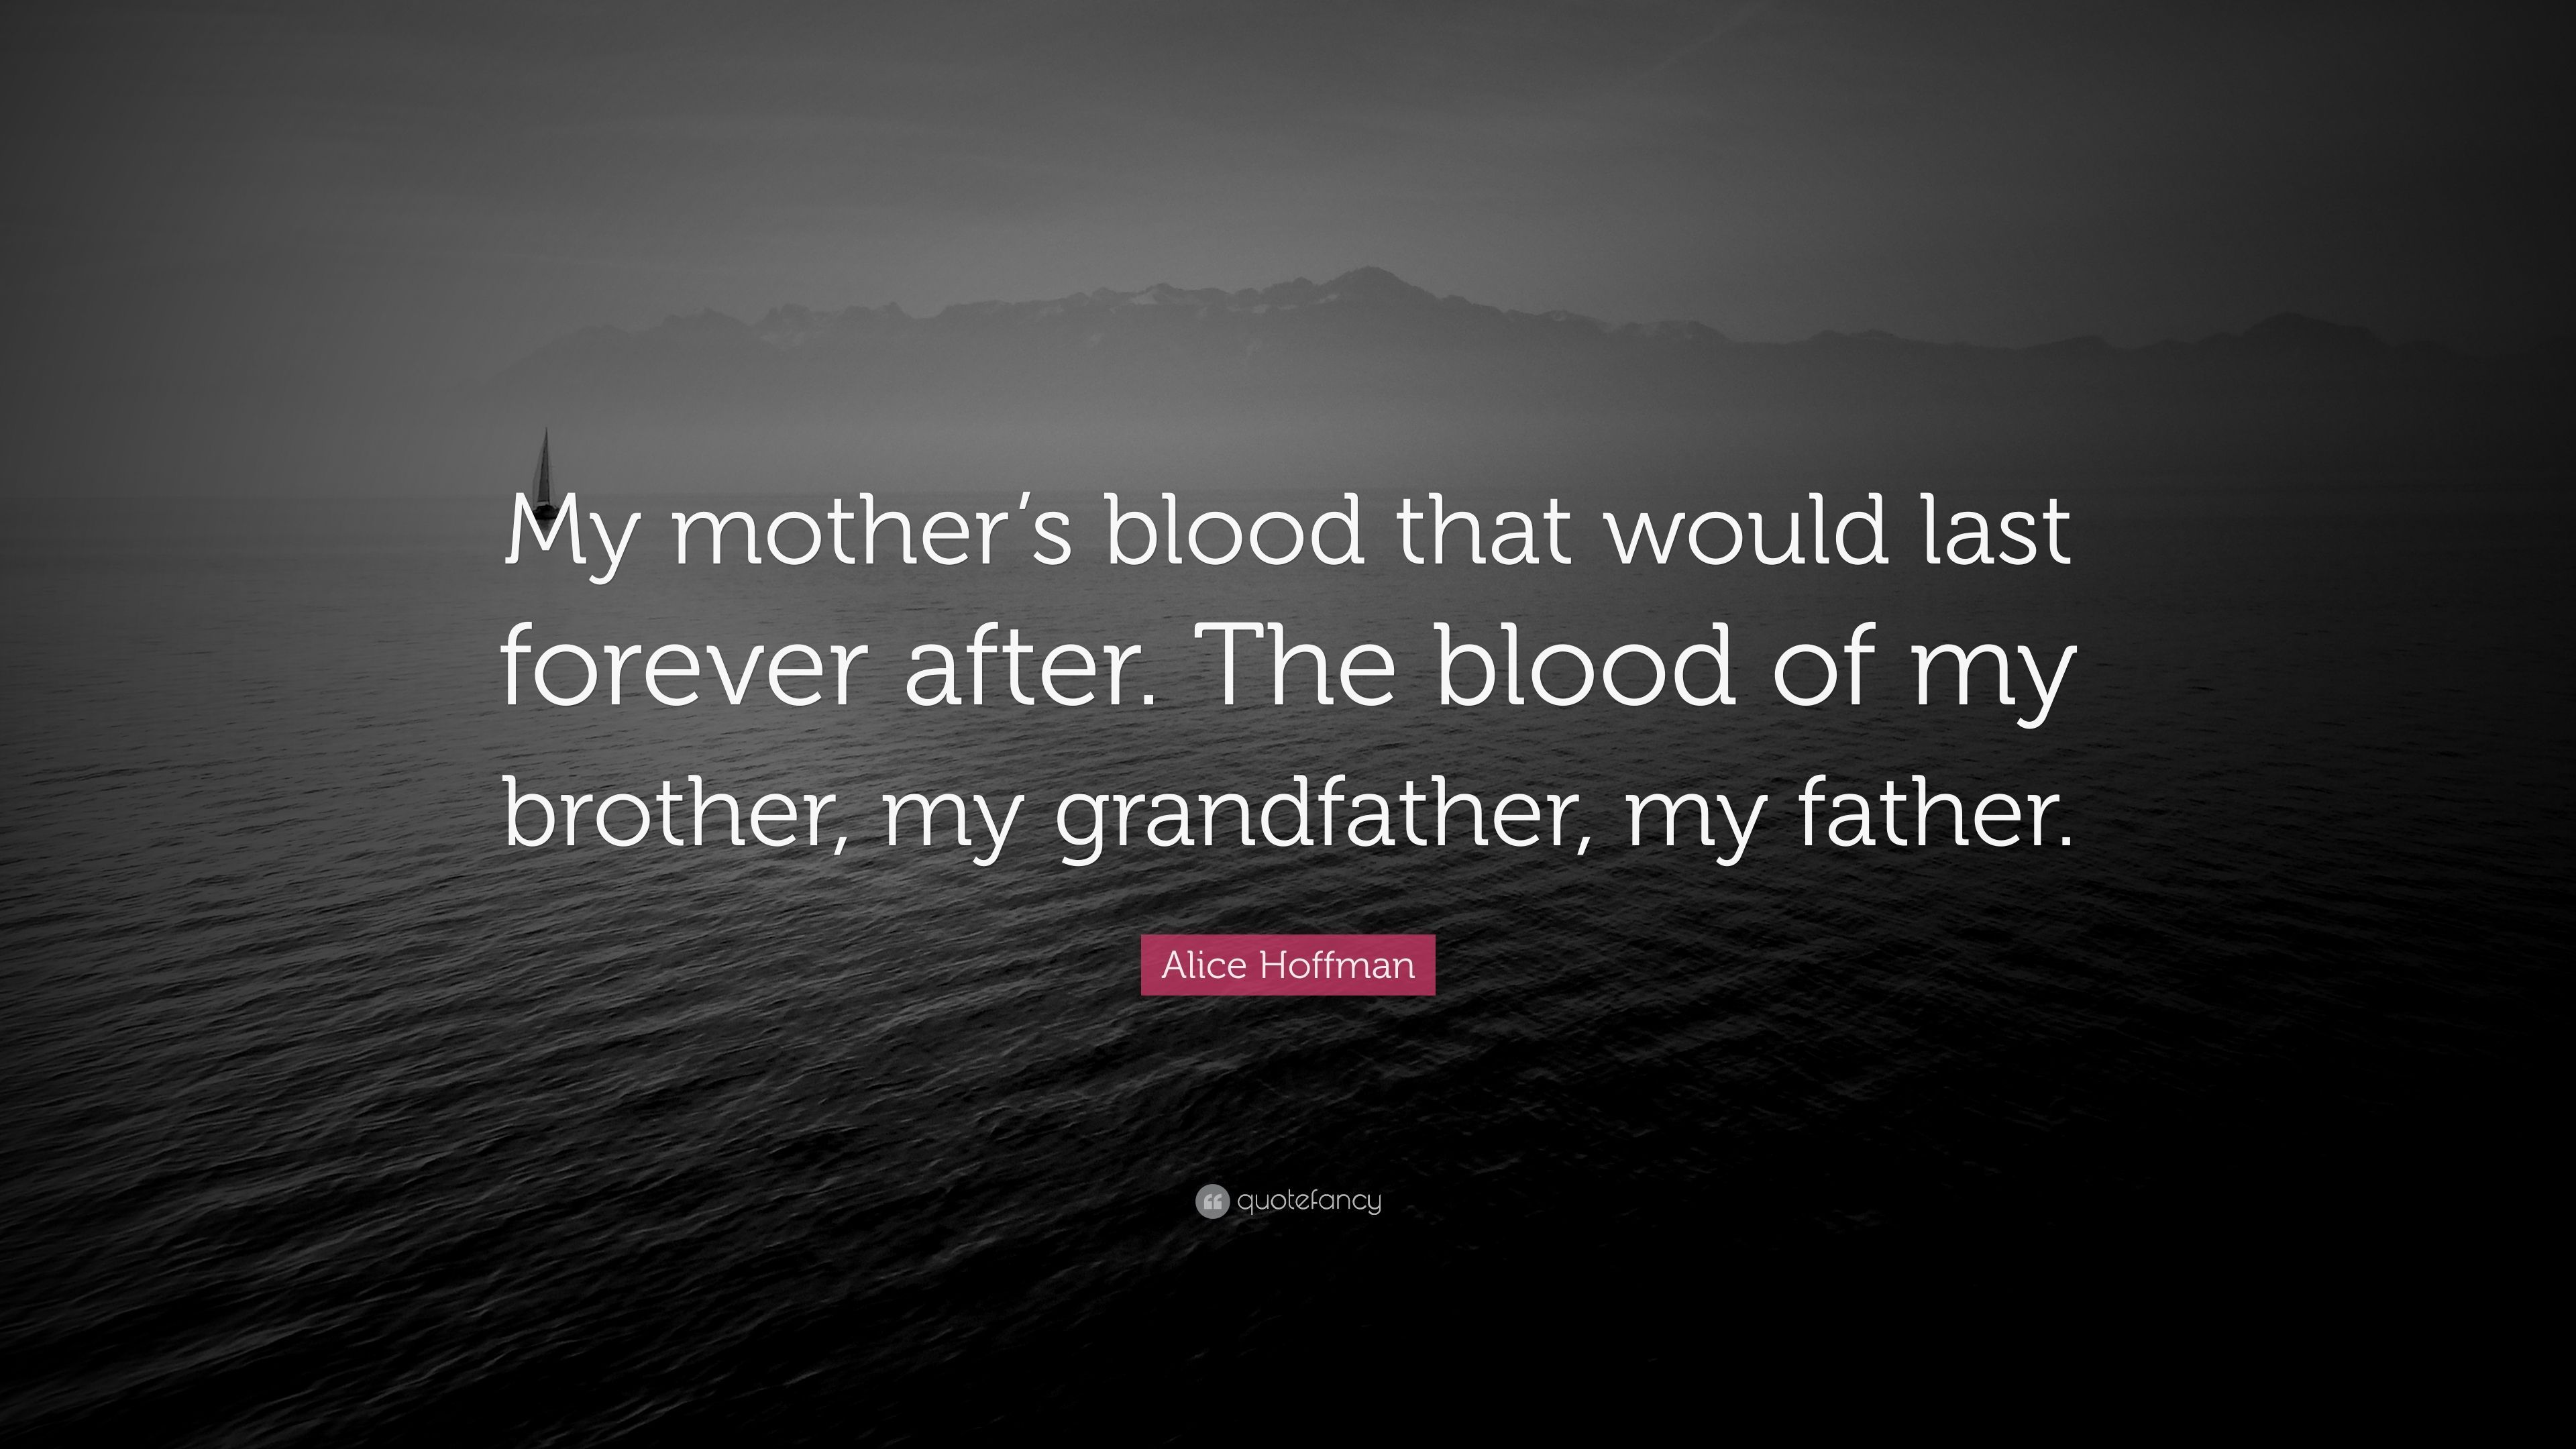 Alice Hoffman Quote: “My mother's blood that would last forever after. The blood of my brother, my grandfather, my father.” (10 wallpaper)